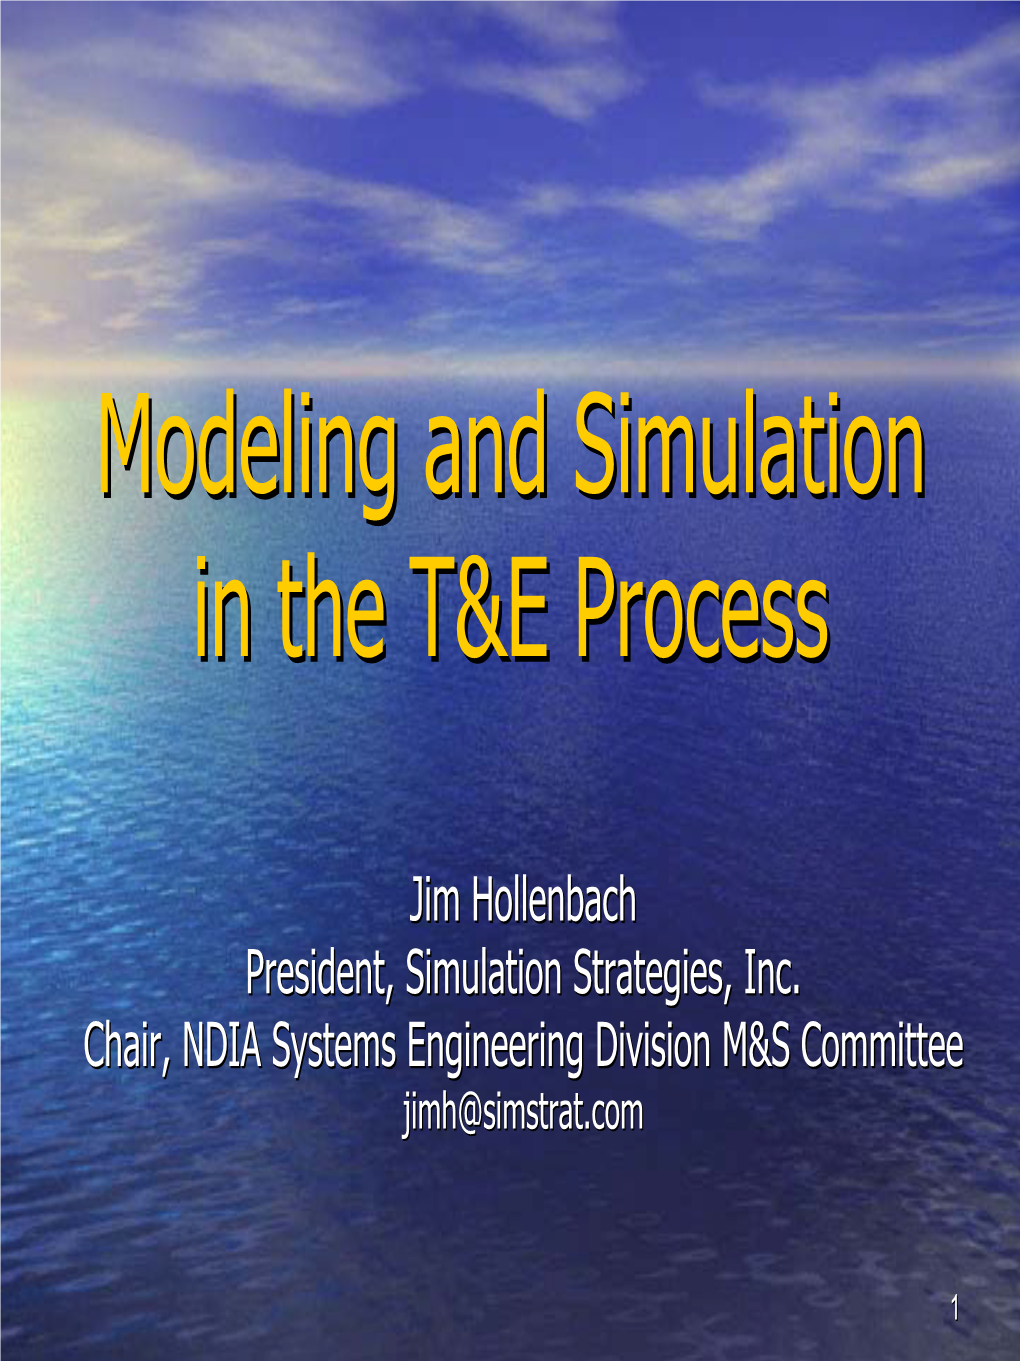 Modeling and Simulation in the T&E Process